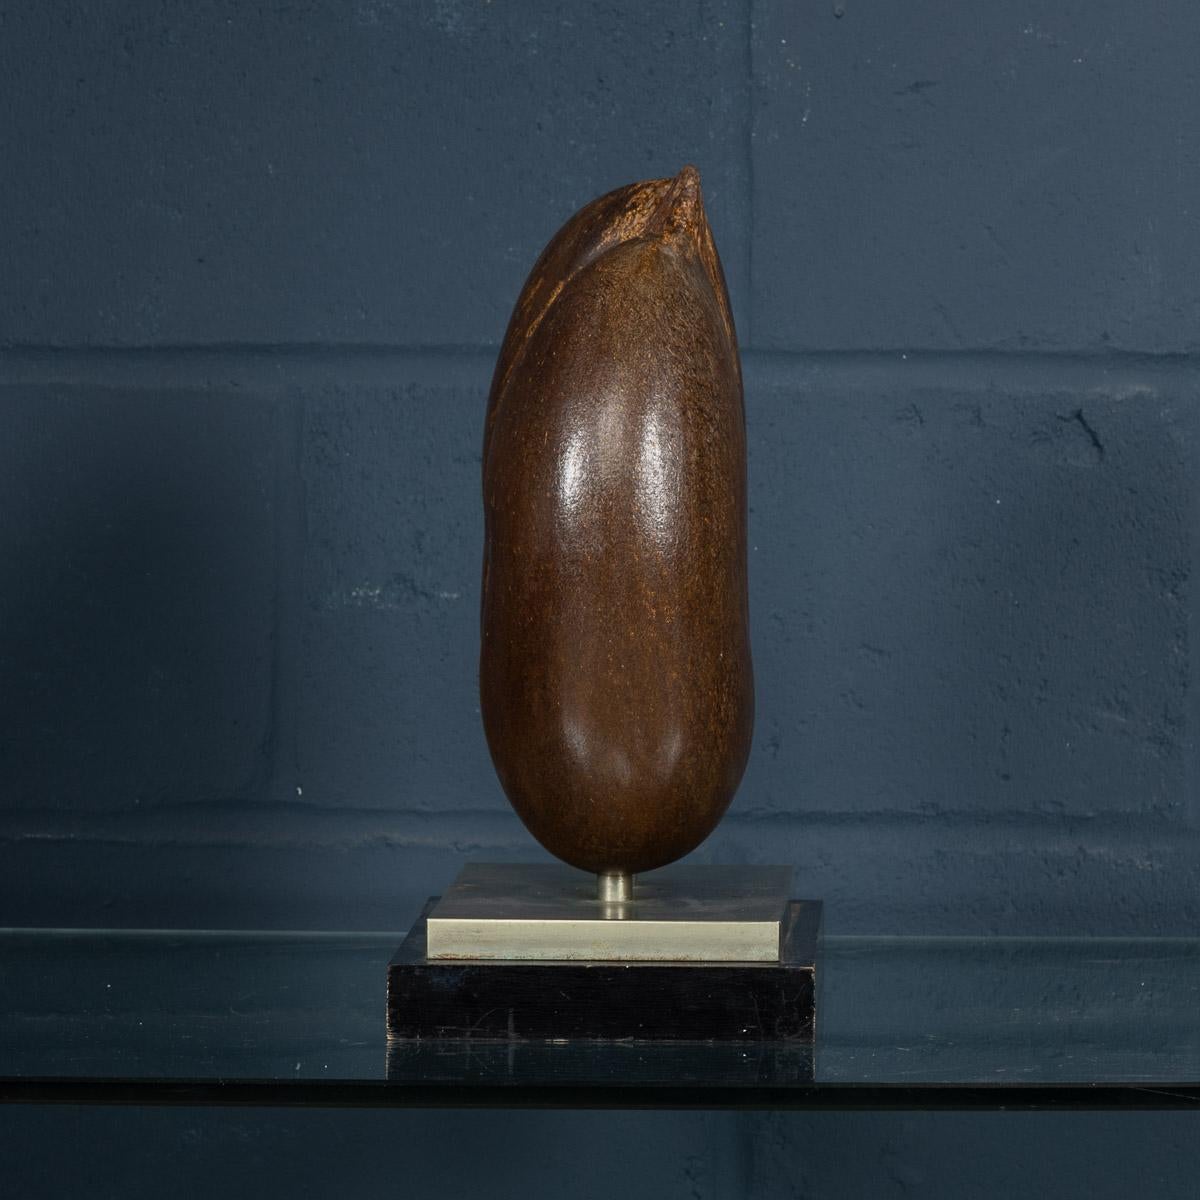 A stunning late 19th century coco de mer nut later mounted on a silver plated stand by the renowned designer Anthony Redmile. Anthony Redmile burst into the London interior design scene in the 1960s, producing some of the most eclectic items for his